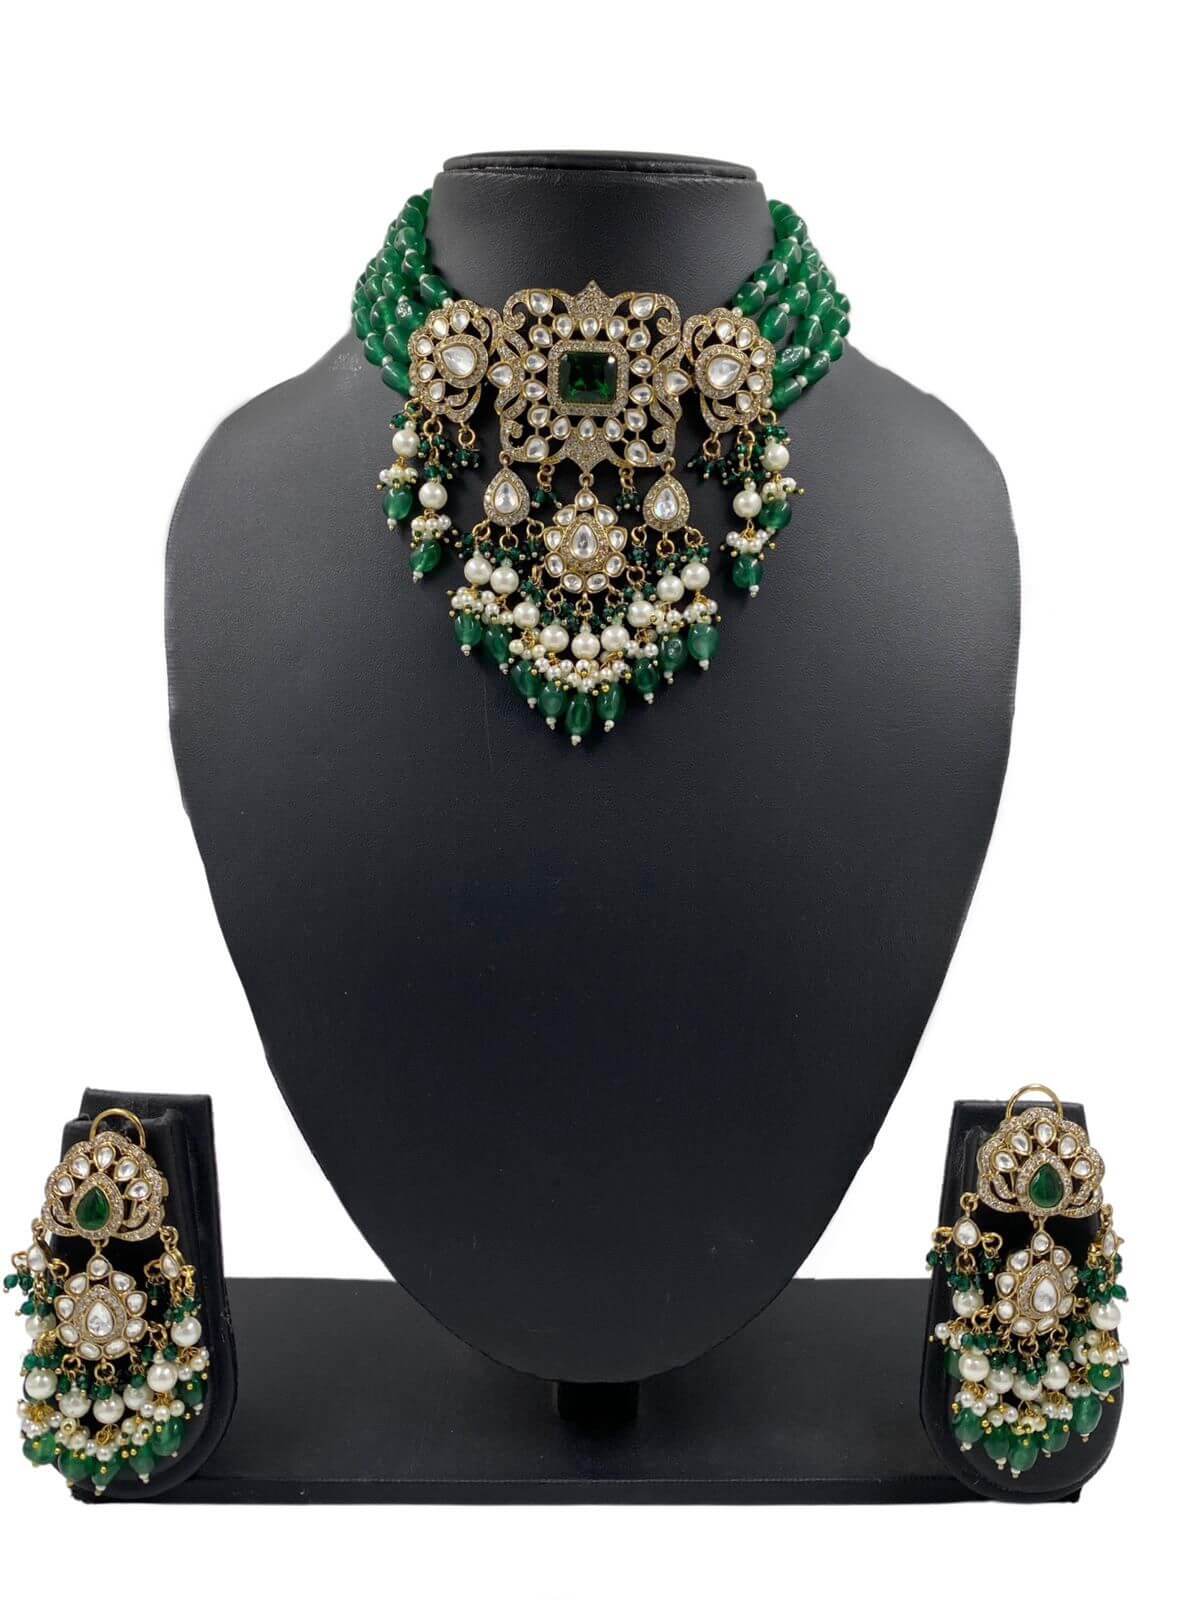 Eleena Stunning Victorian Polki Choker Necklace Set For Weddings By Gehna Shop Victorian Necklace Sets